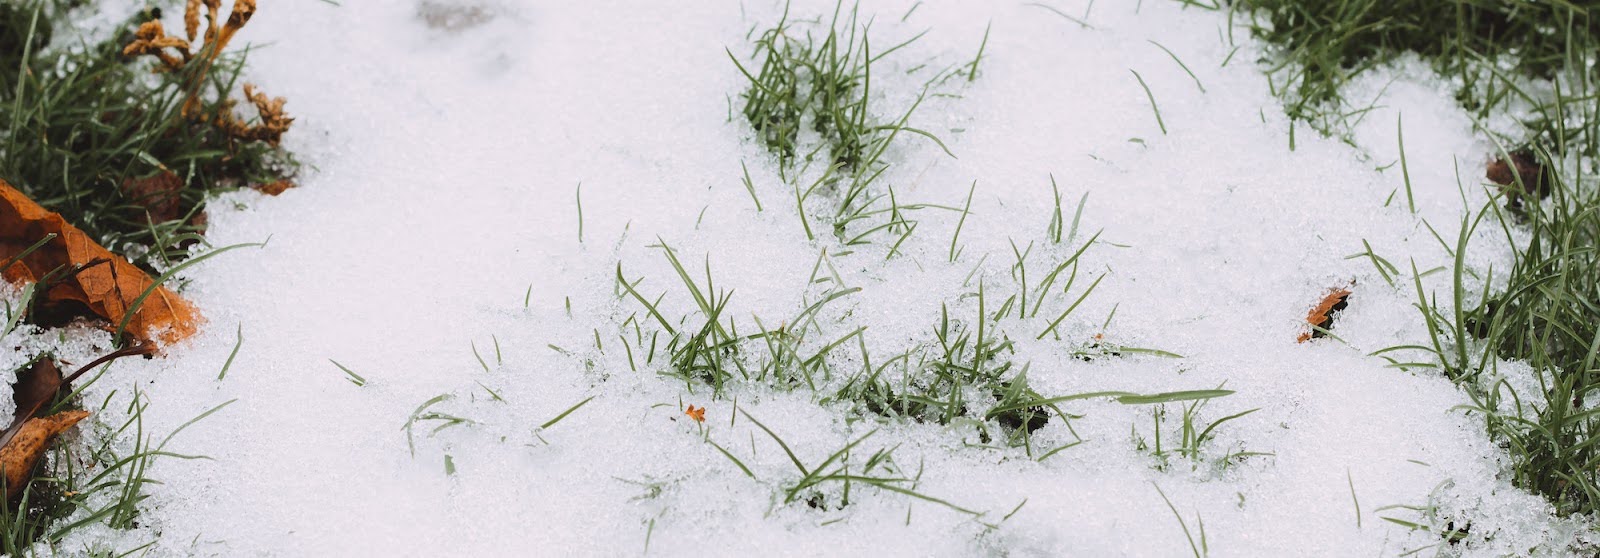 An ice covered lawn